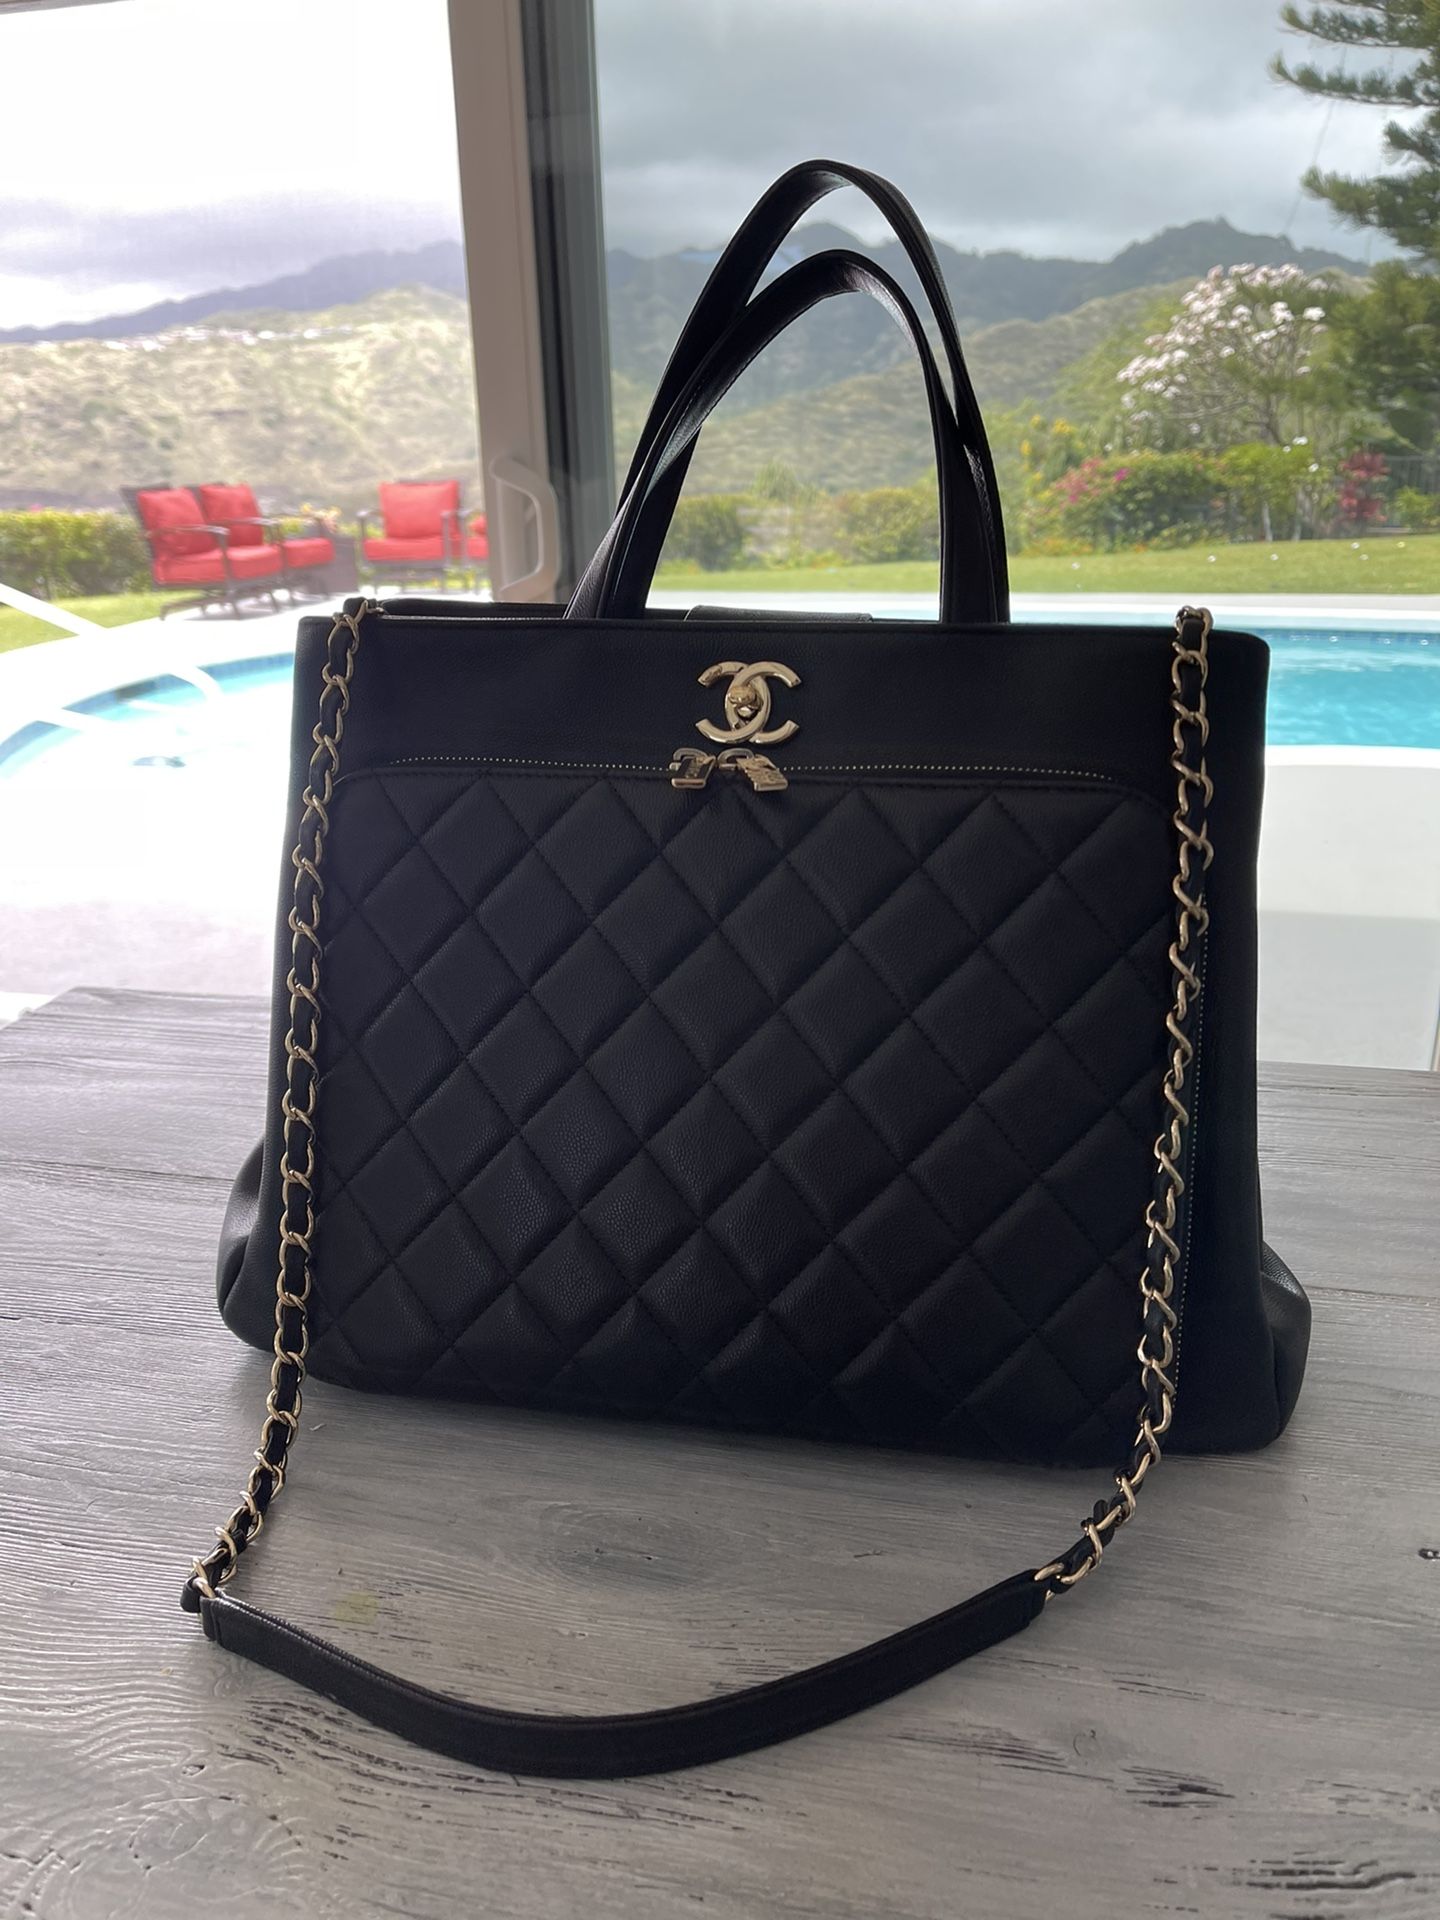 Chanel Preloved Business Affinity Tote Bag